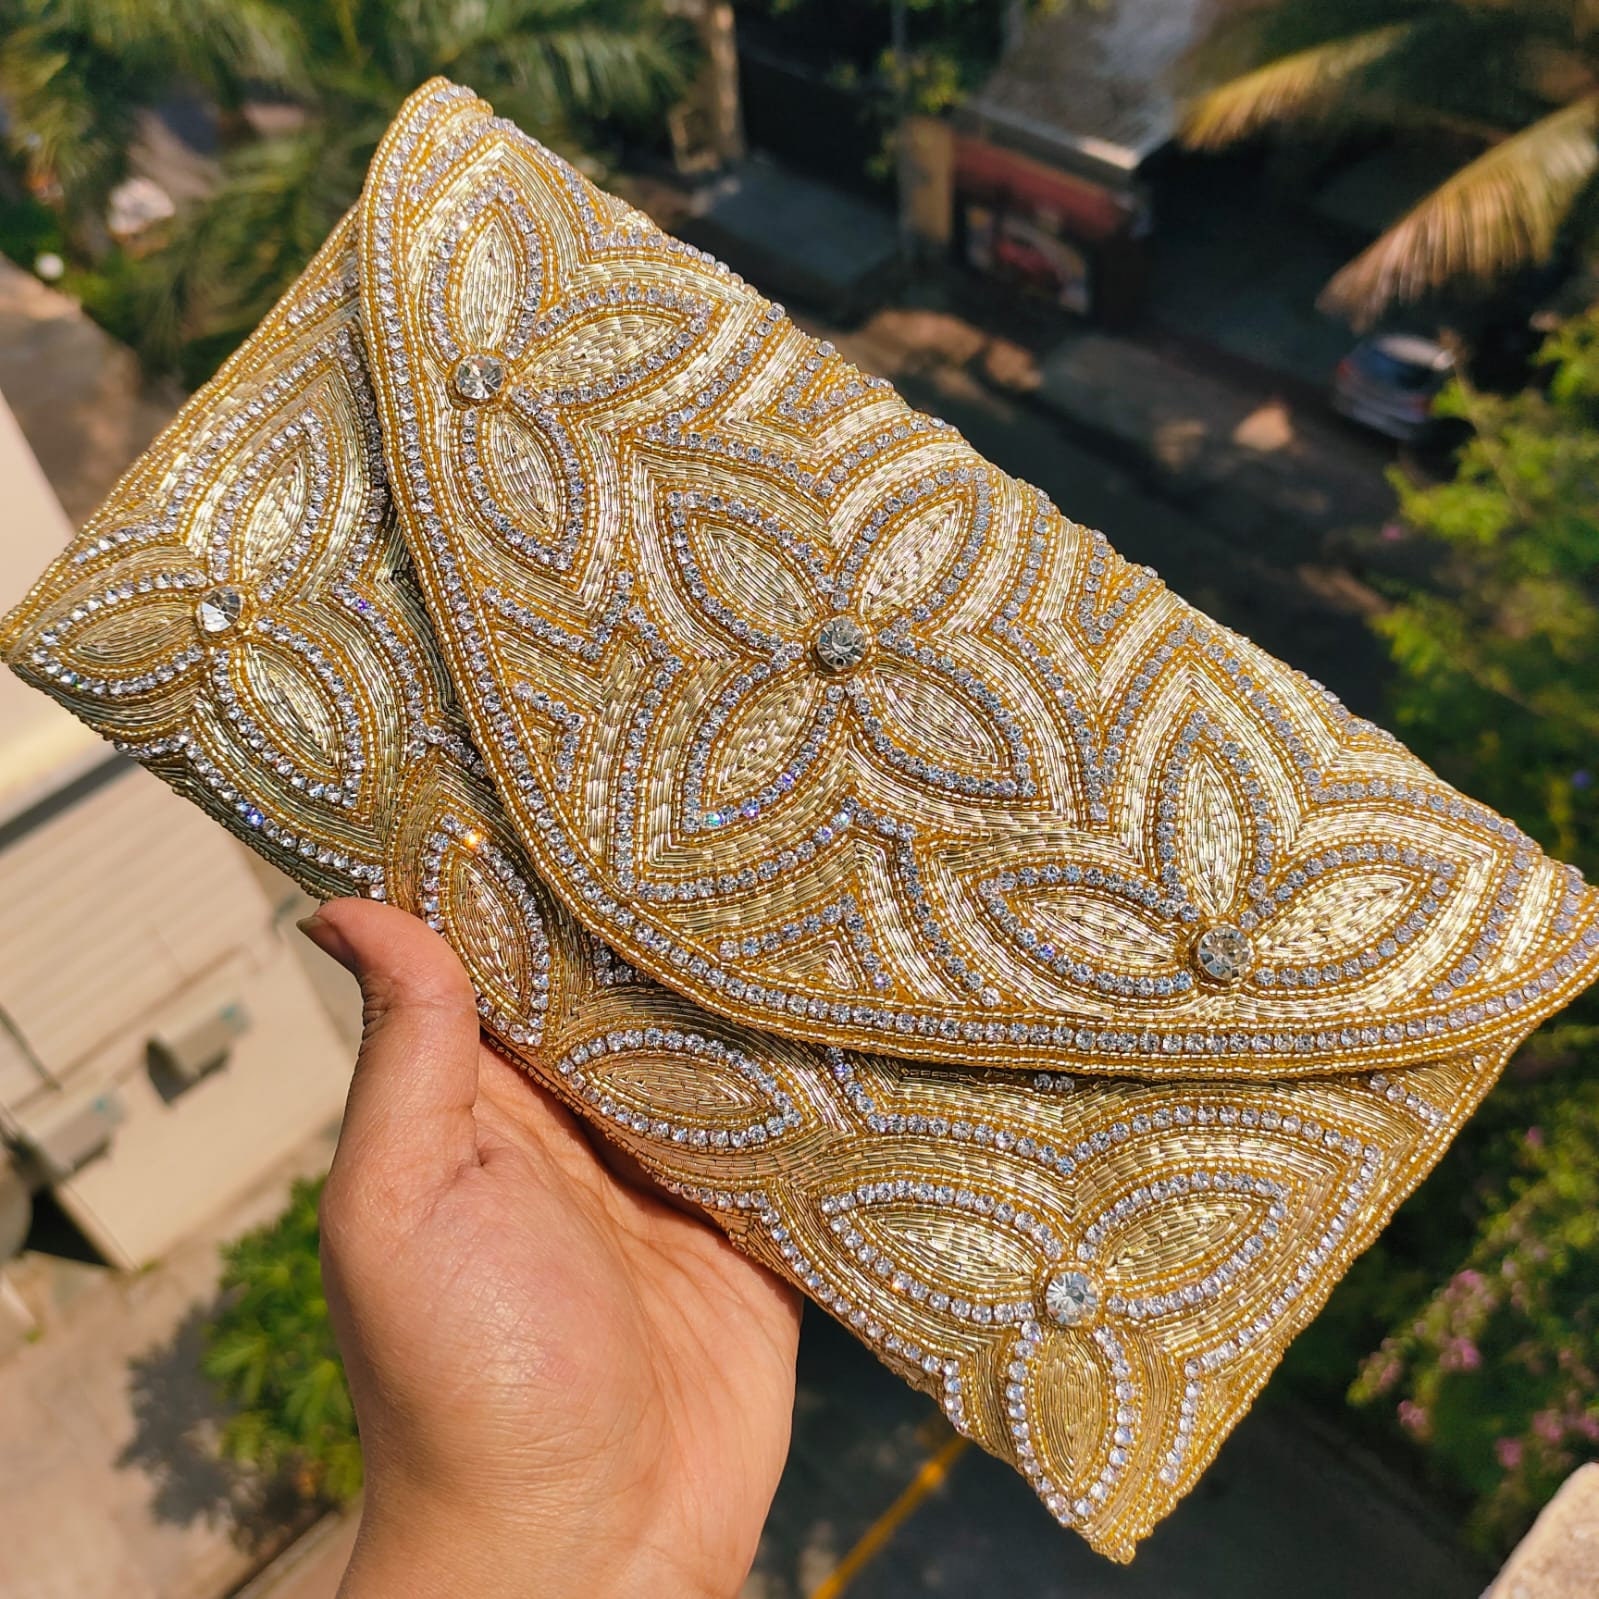 Golden Evening Clutch Purse For Wedding With Metal Bow Chain Shoulder Strap  Perfect For Weddings And Special Occasions From Sellerstore05, $13 |  DHgate.Com